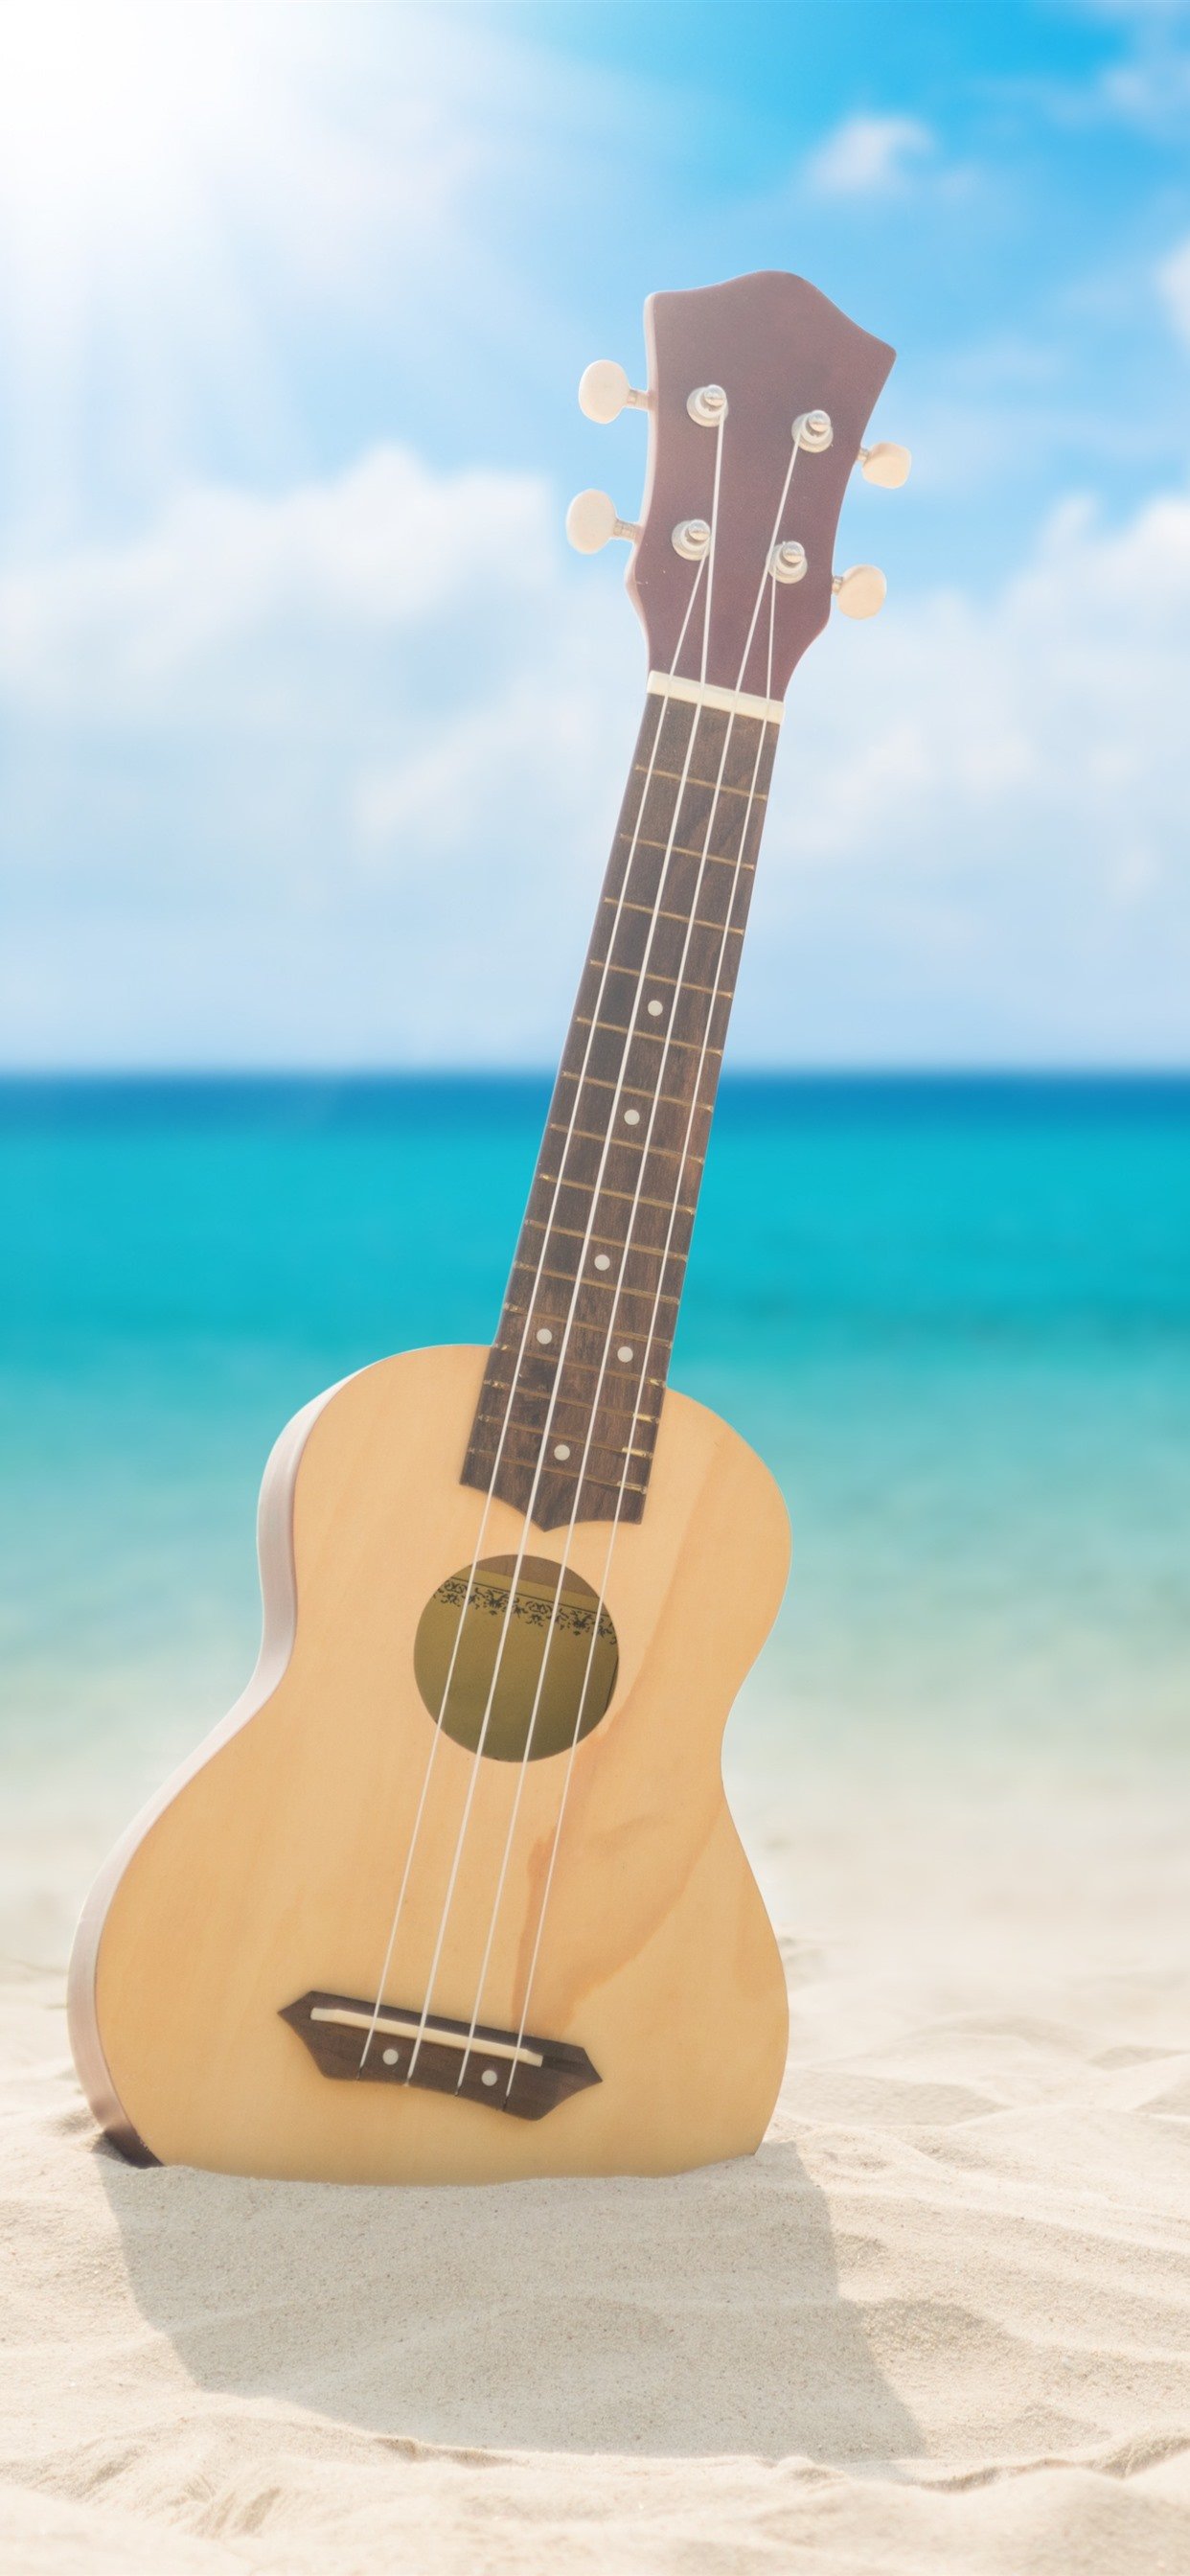 Guitar, Beach, Sea, Clouds, Sunshine 1242x2688 IPhone 11 Pro XS Max Wallpaper, Background, Picture, Image